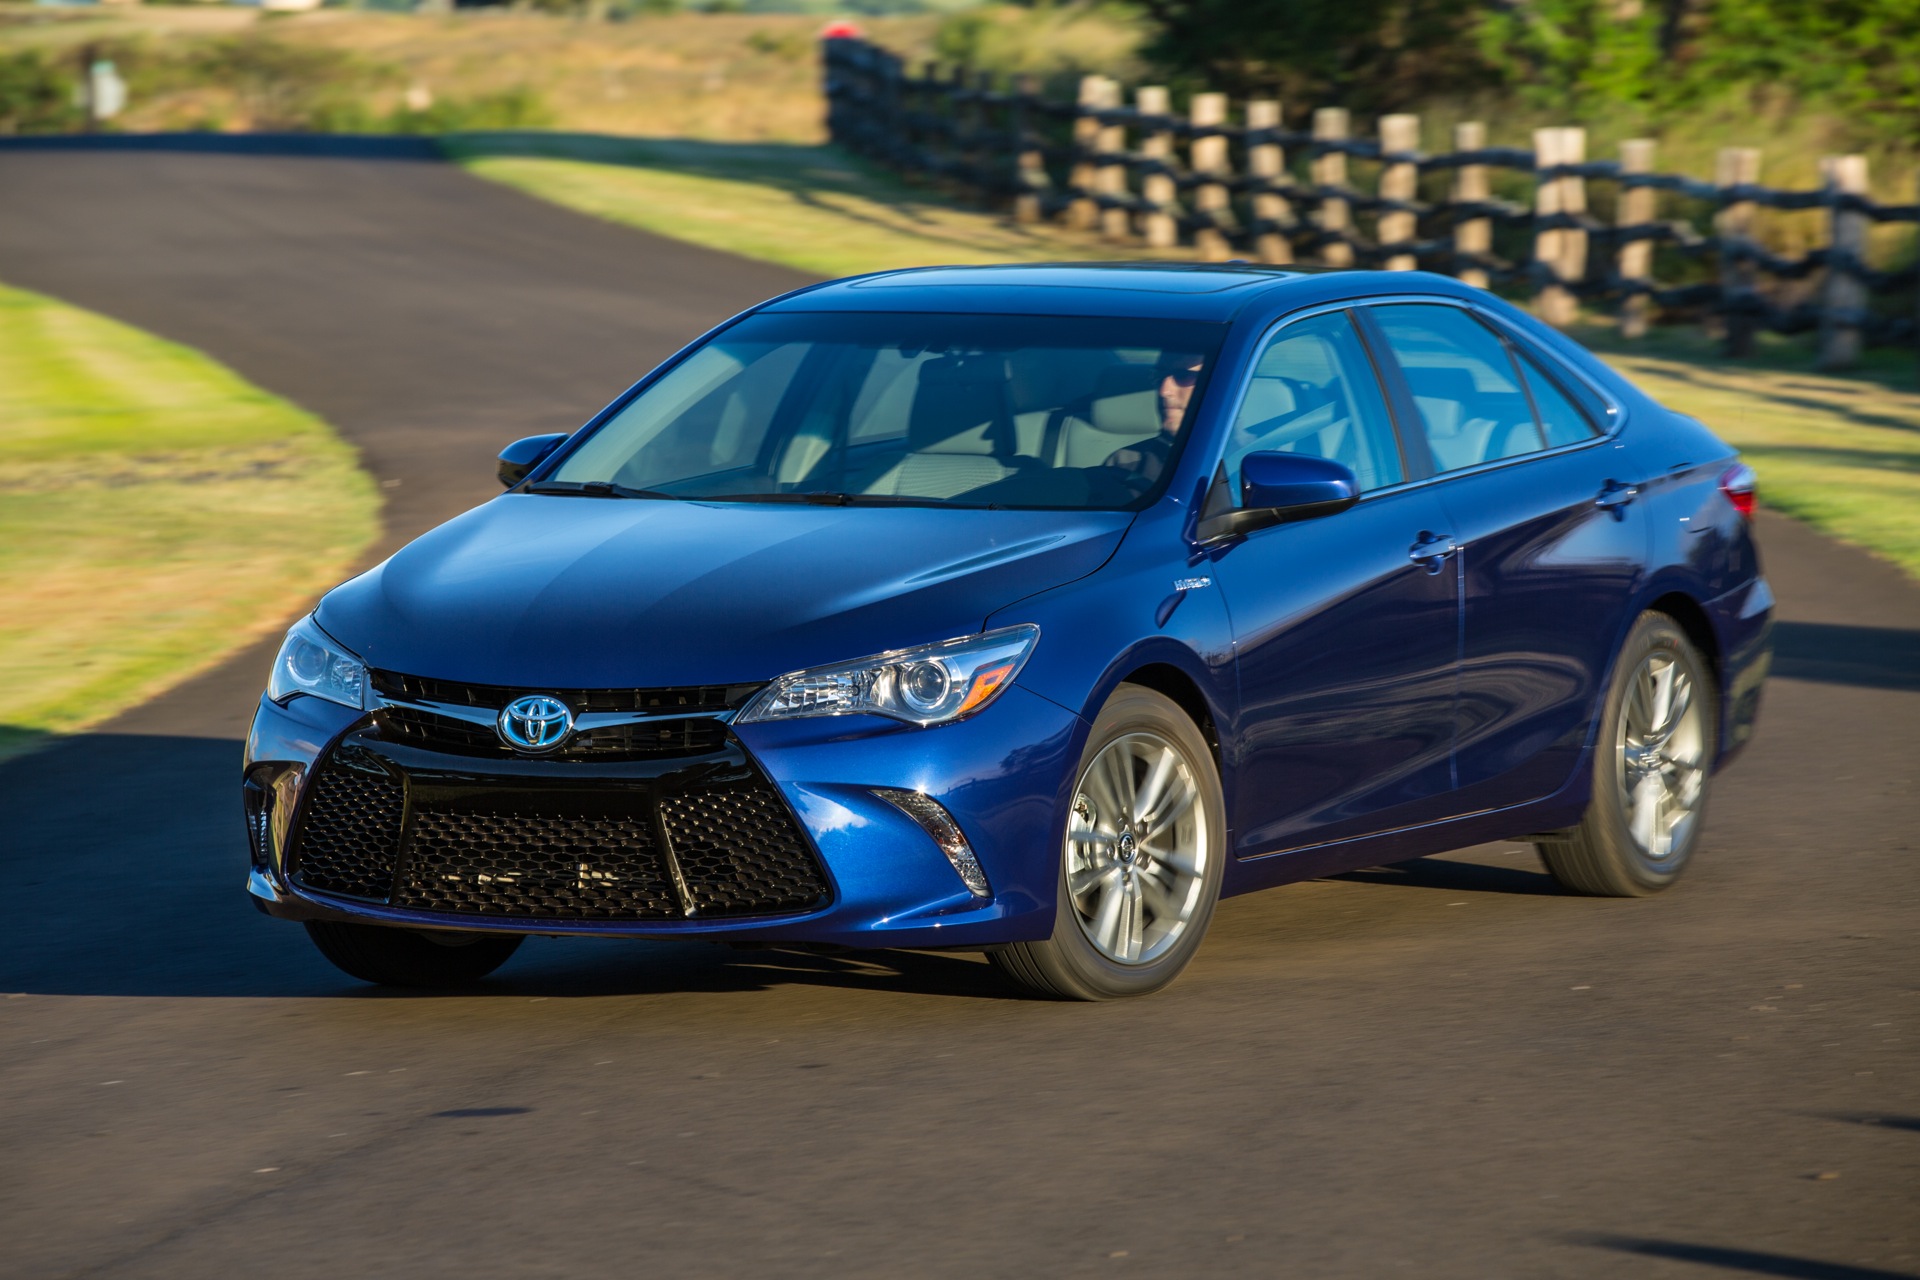 2015 Toyota Camry: Five-Star Safety, But Short Of The Top Tier